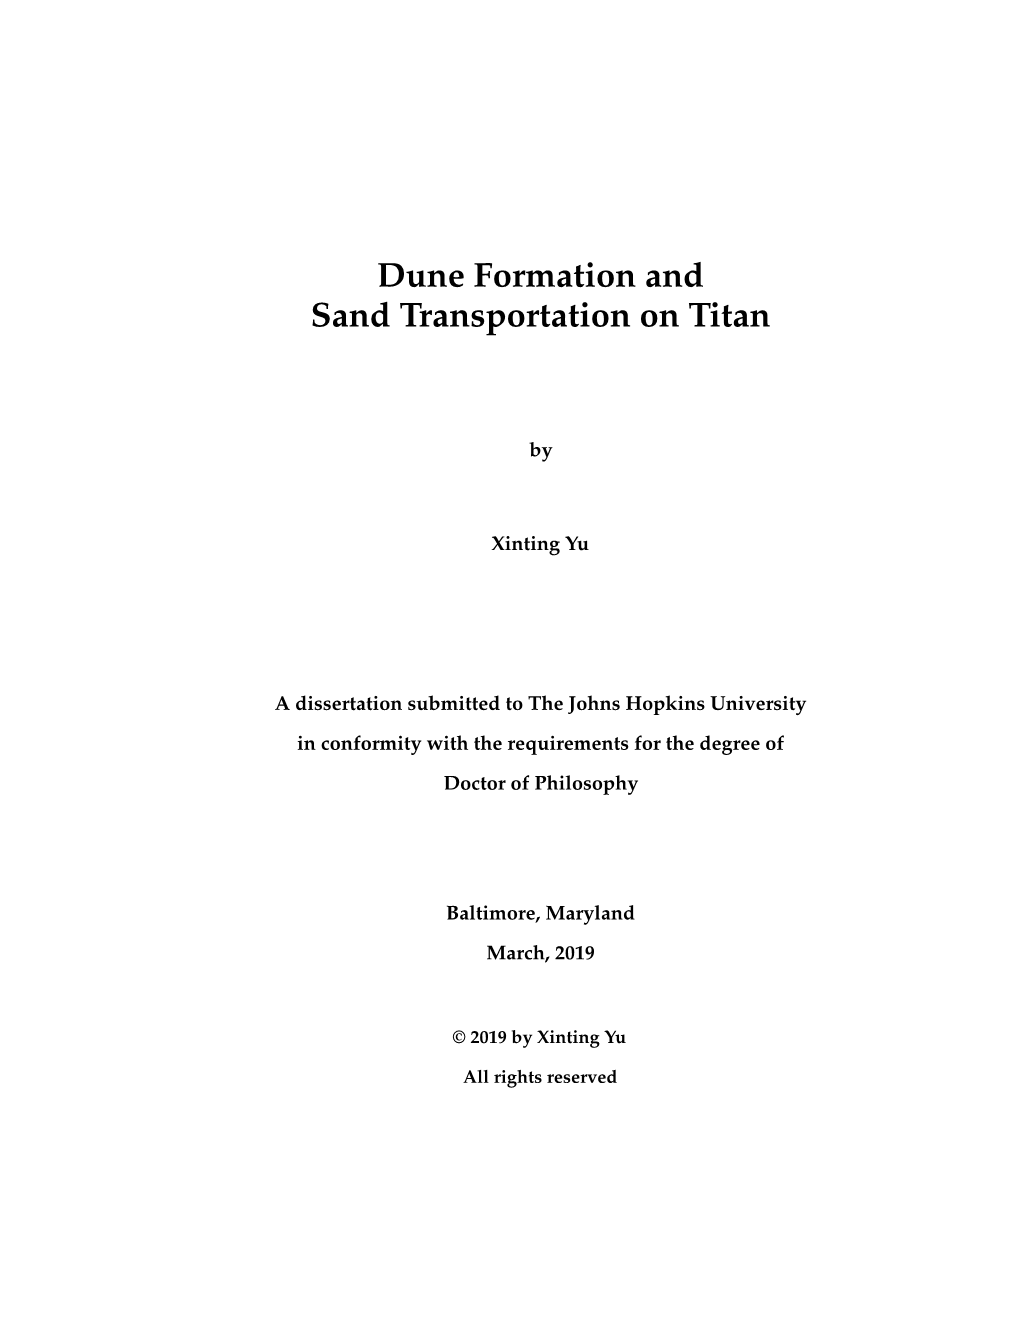 Dune Formation and Sand Transportation on Titan